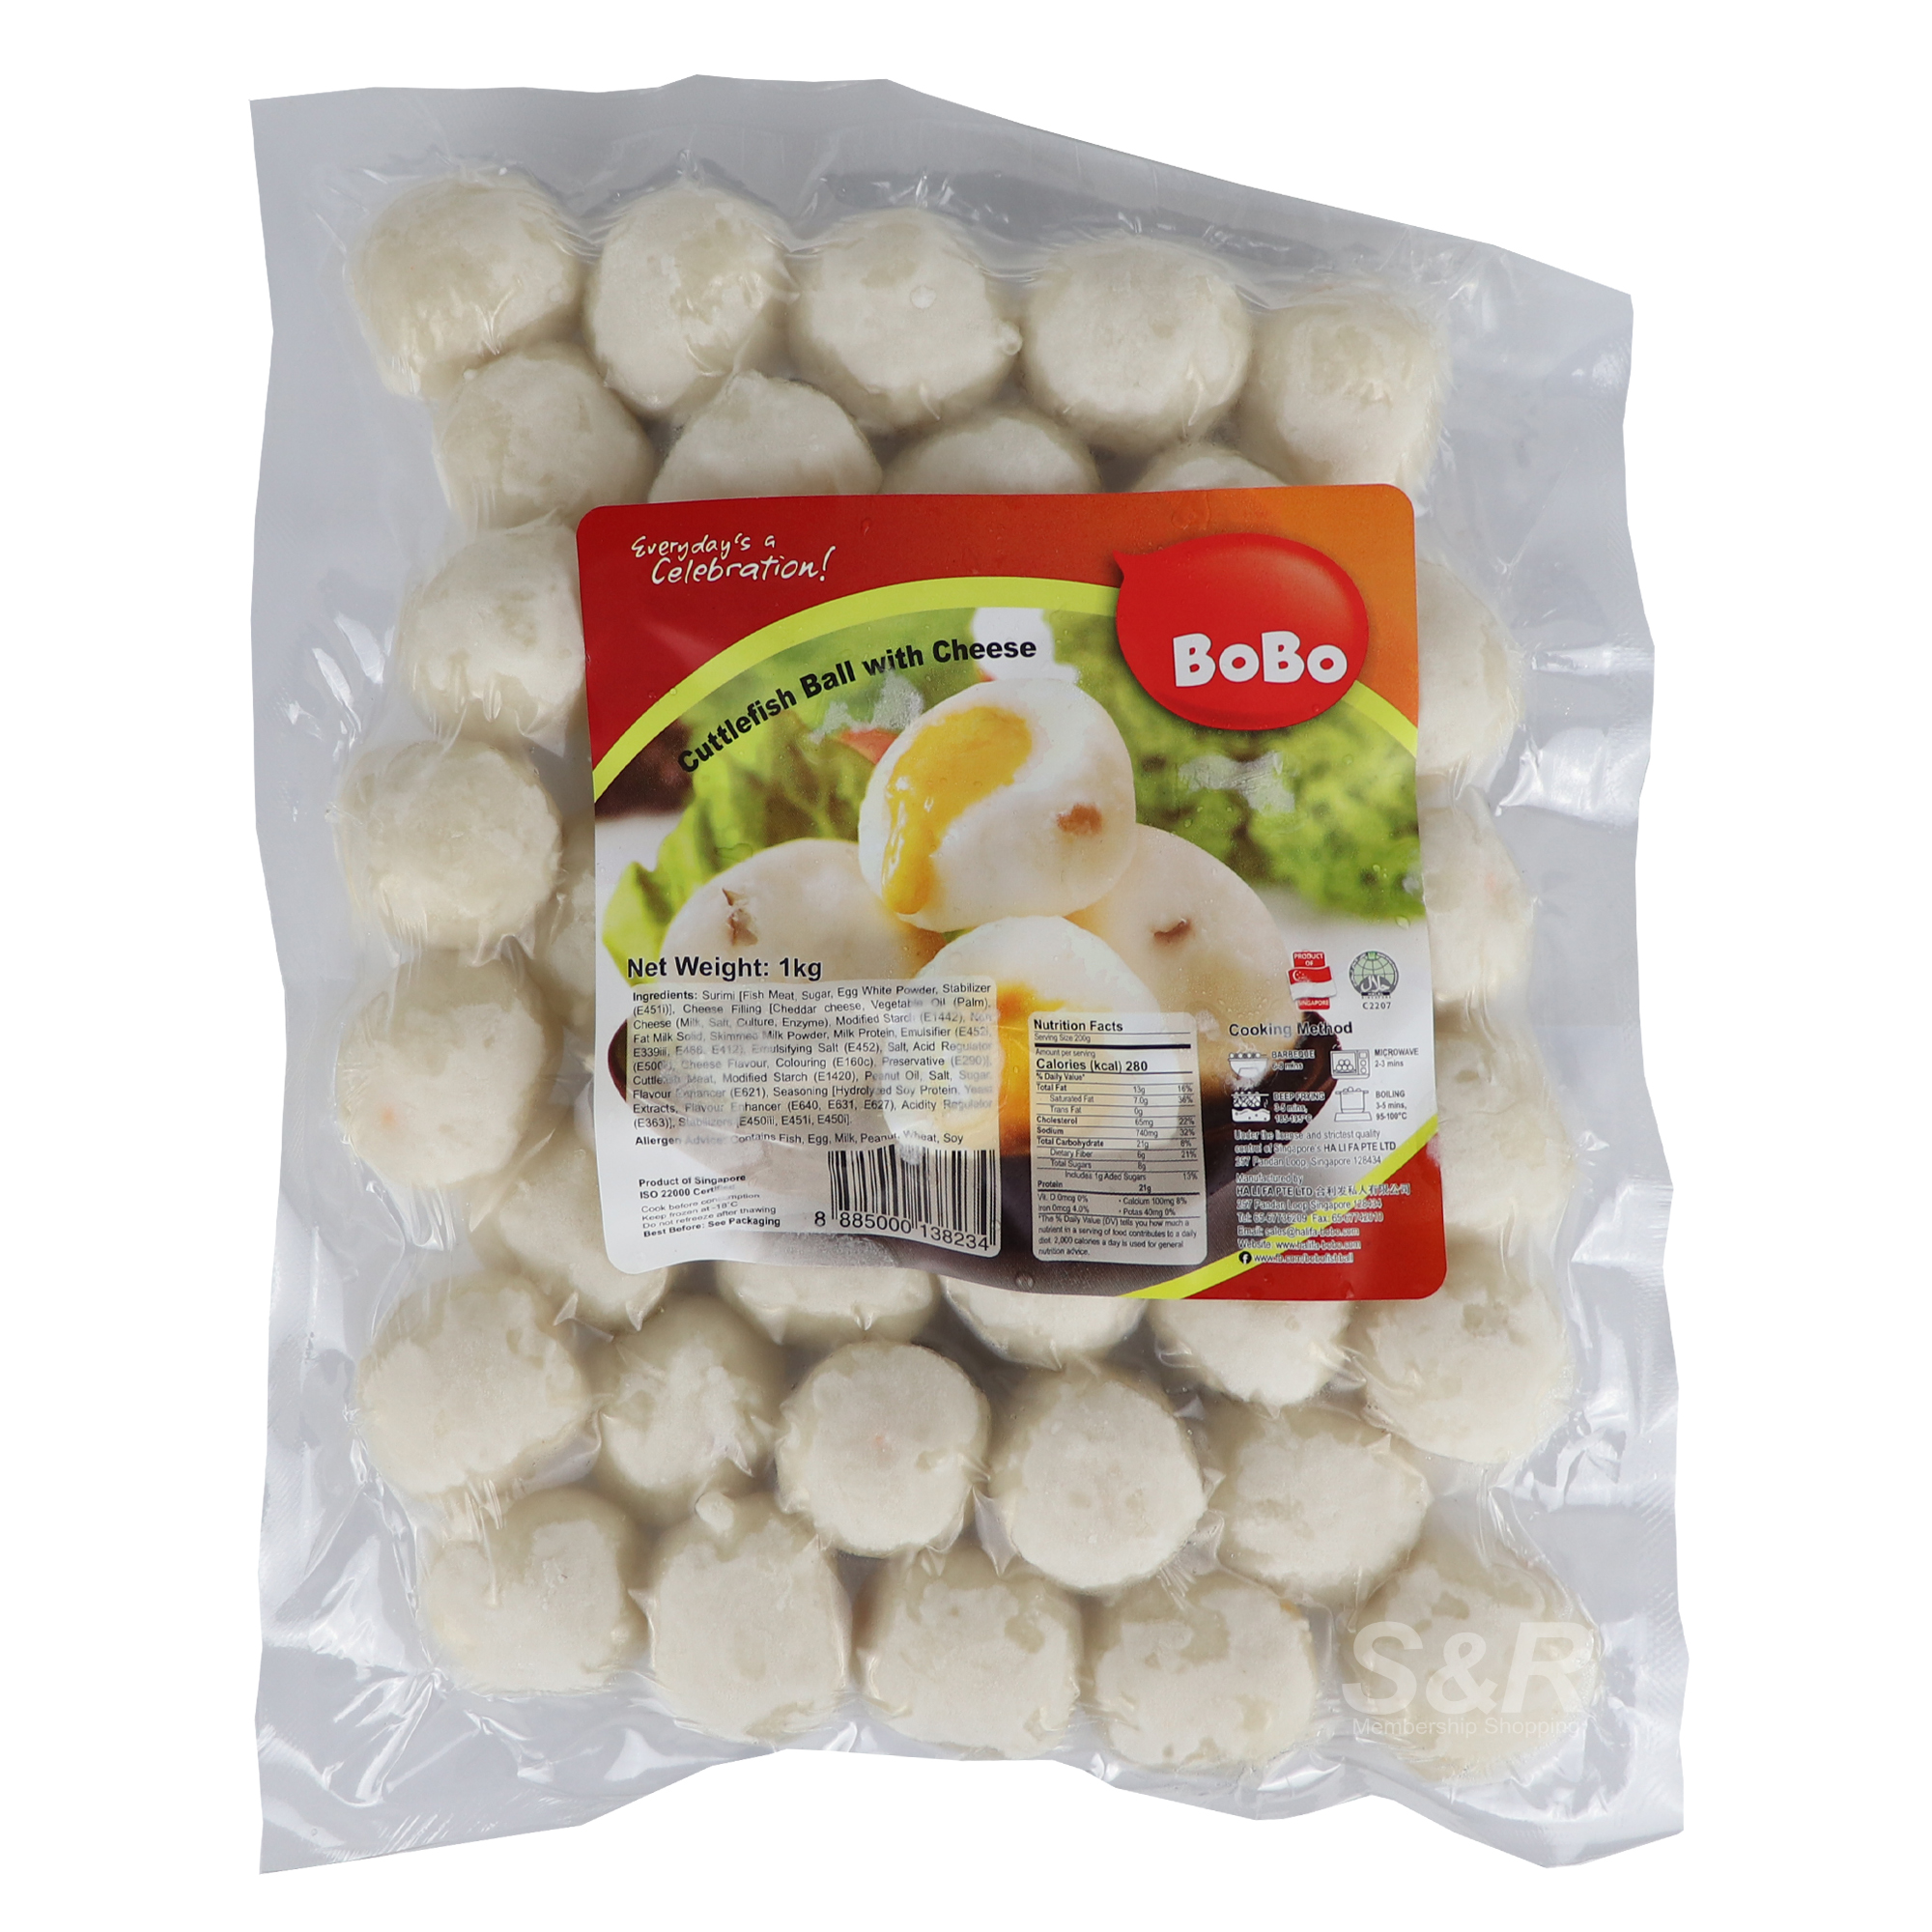 Bobo Cuttlefish Ball with Cheese 1kg